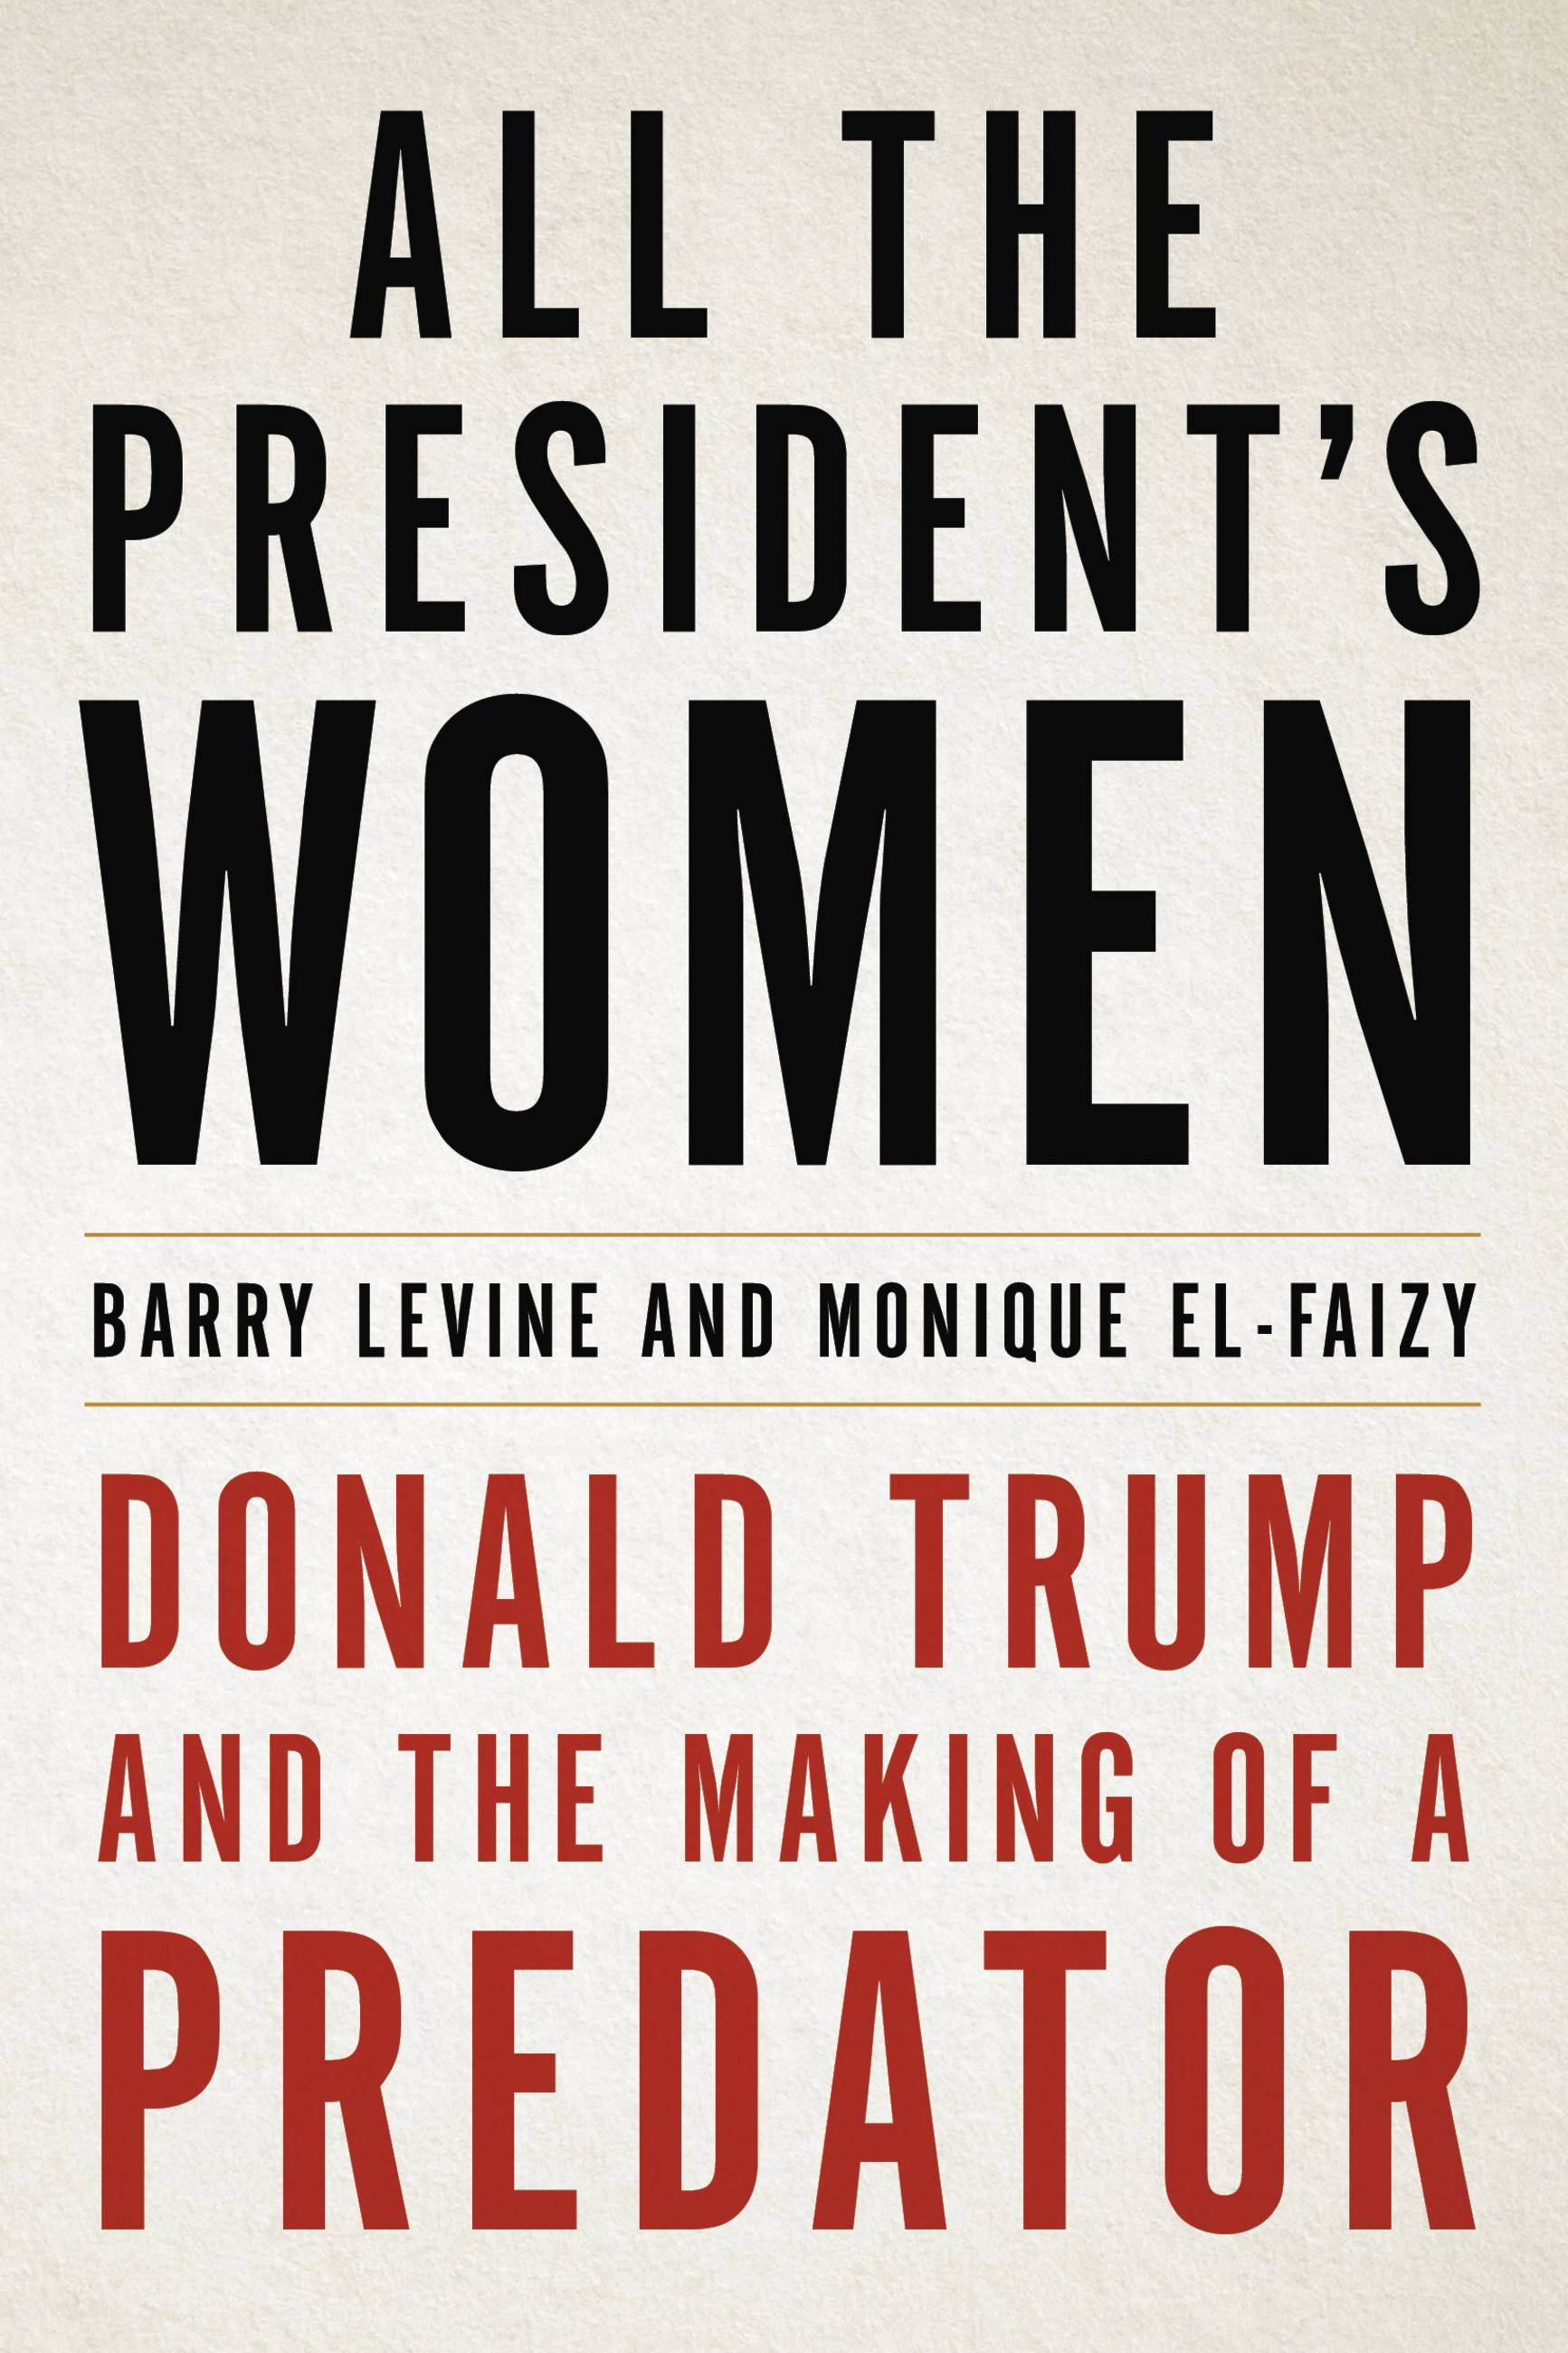 Pussy Fucked Doggy - All the President's Women by Barry Levine | Hachette Book Group